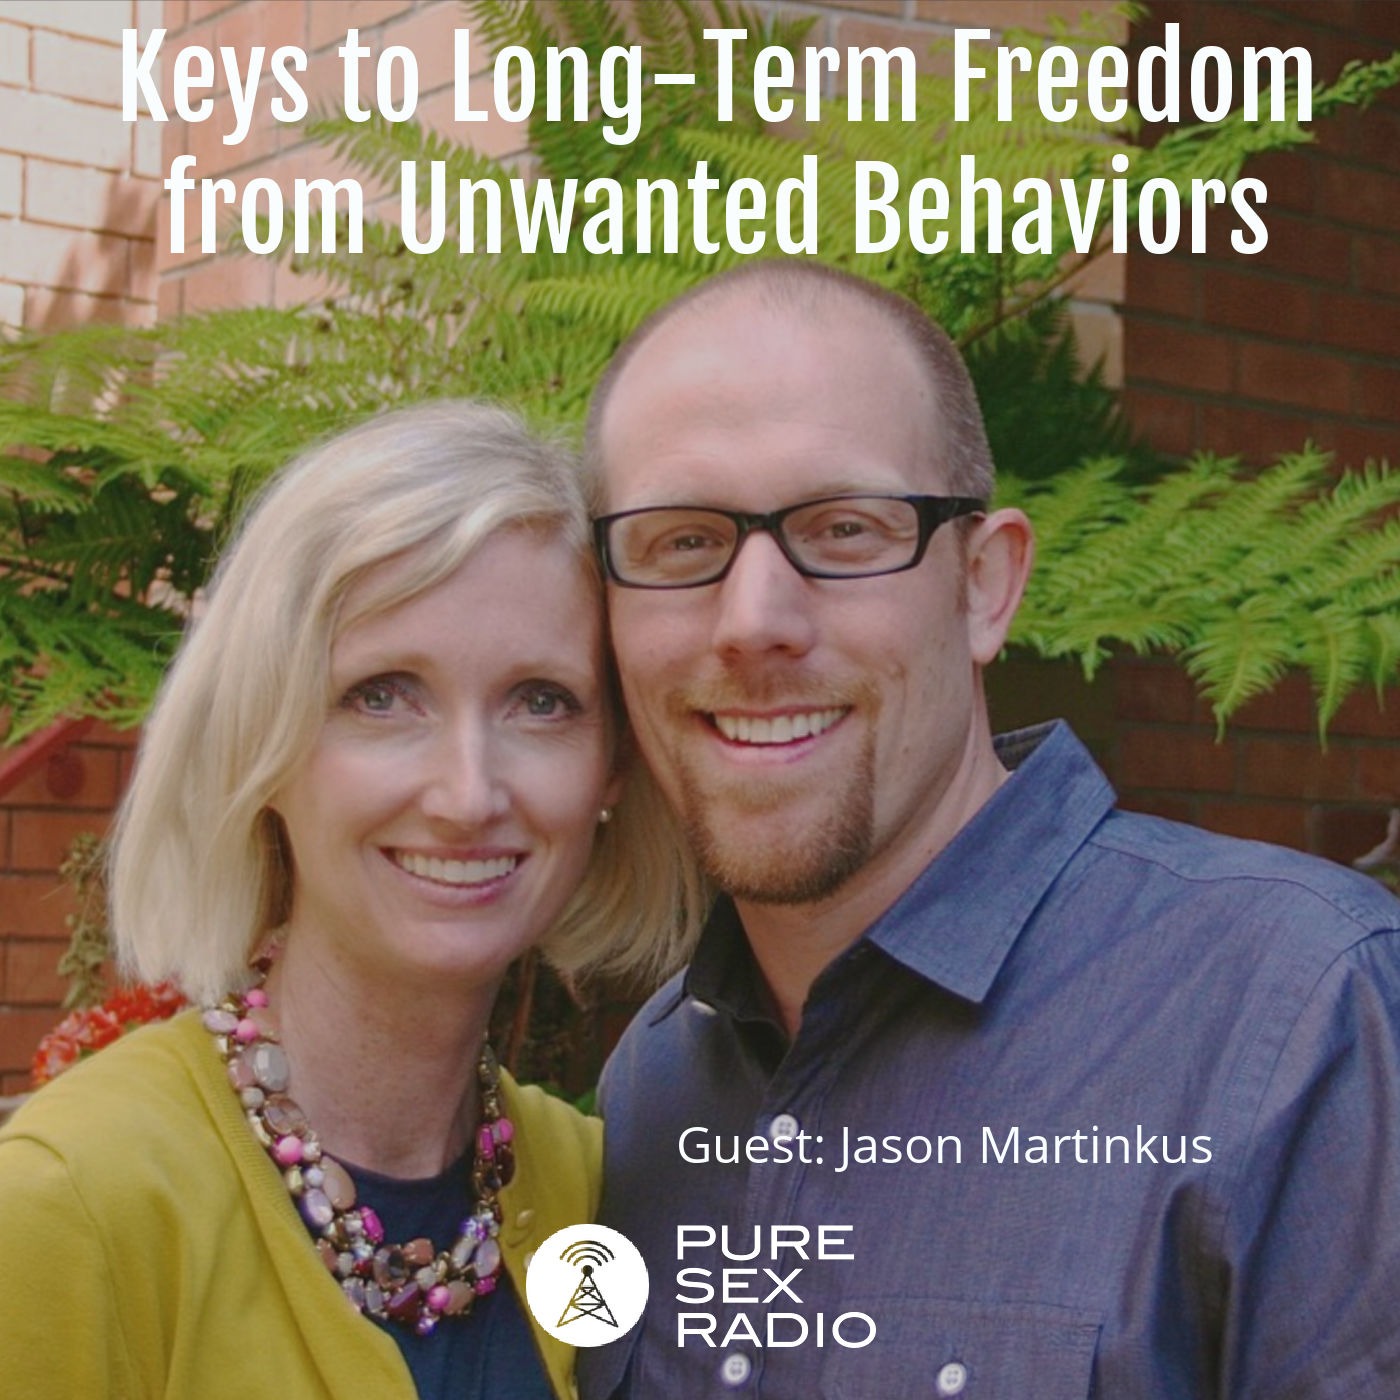 Keys to Long-Term Freedom from Unwanted Behaviors